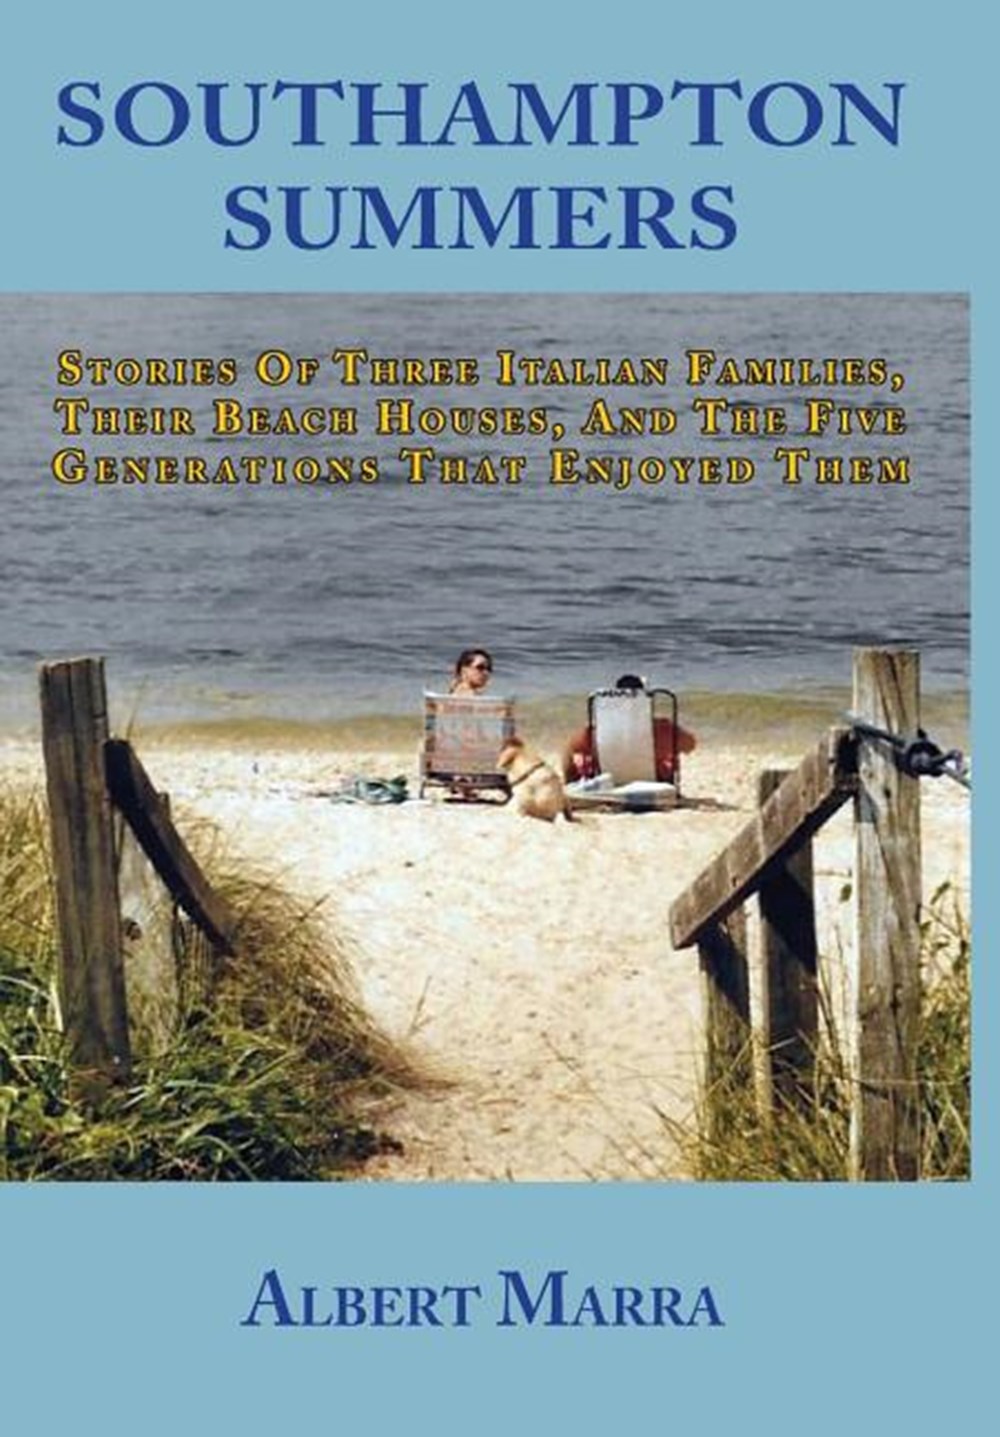 Southampton Summers: Stories of Three Italian Families, Their Beach Houses, and the Five Generations